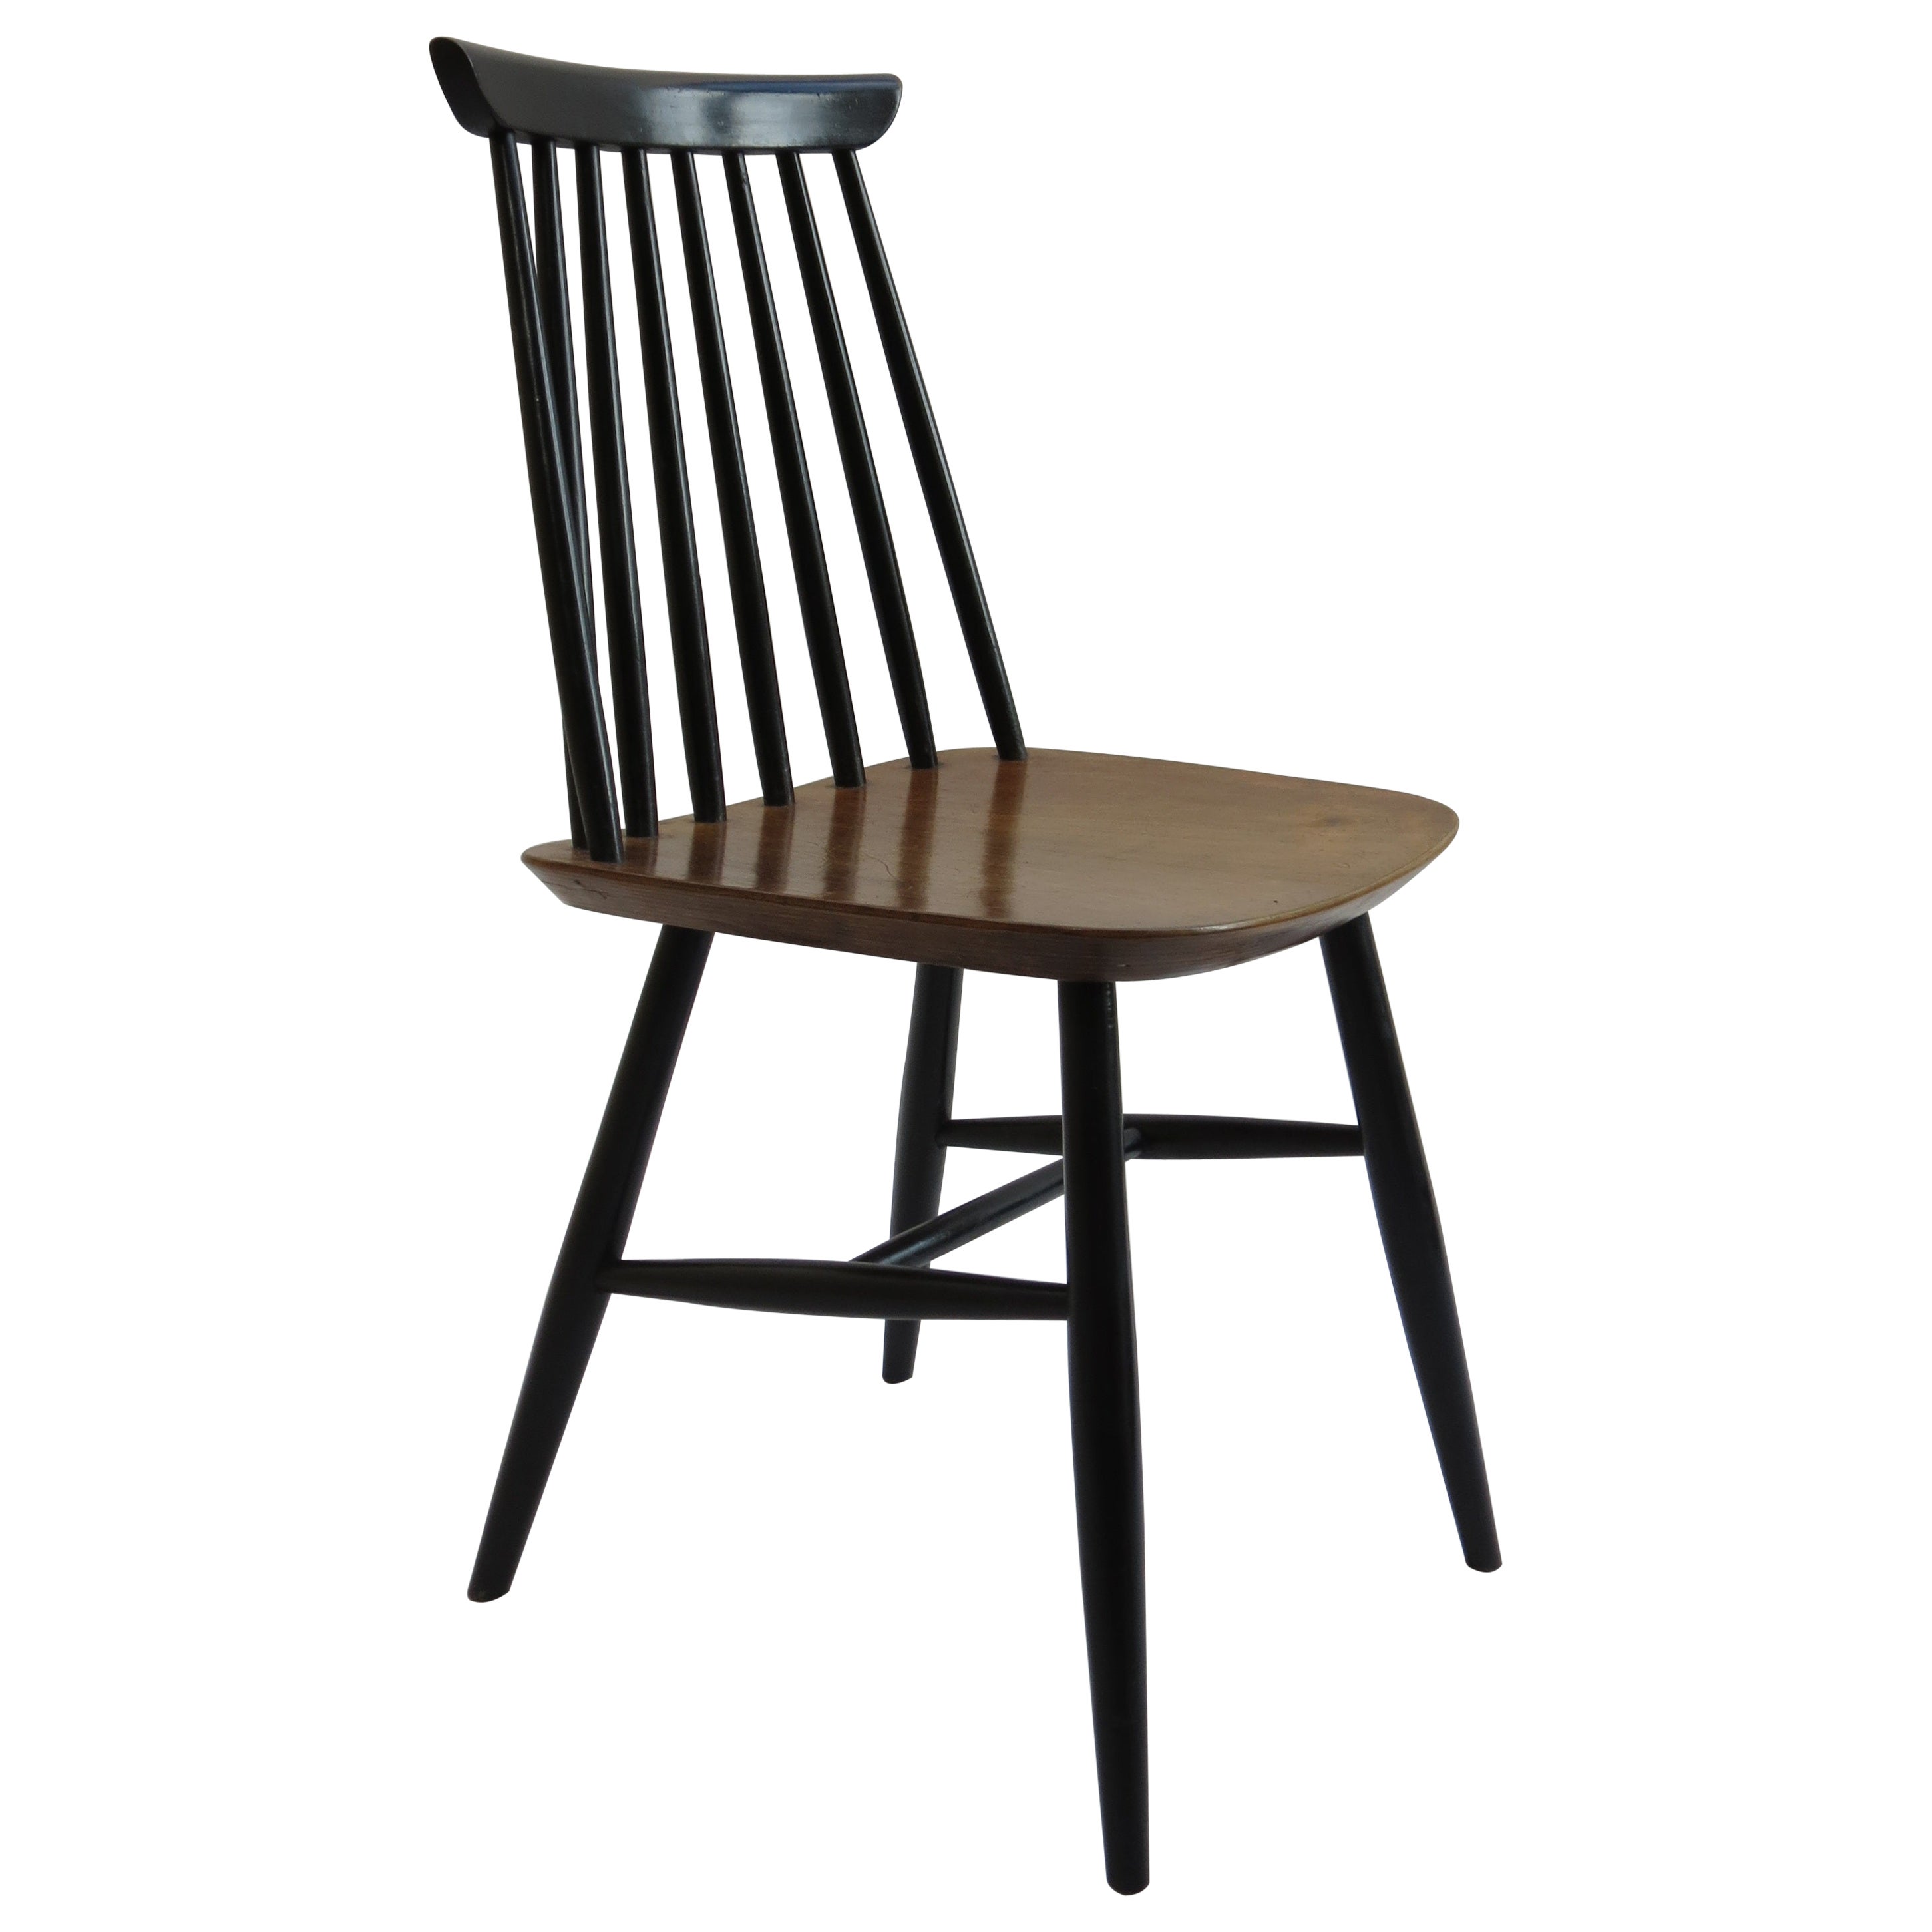 The 1950s Black and Walnut Dining Chair in the Style of Imari Tapiovaara